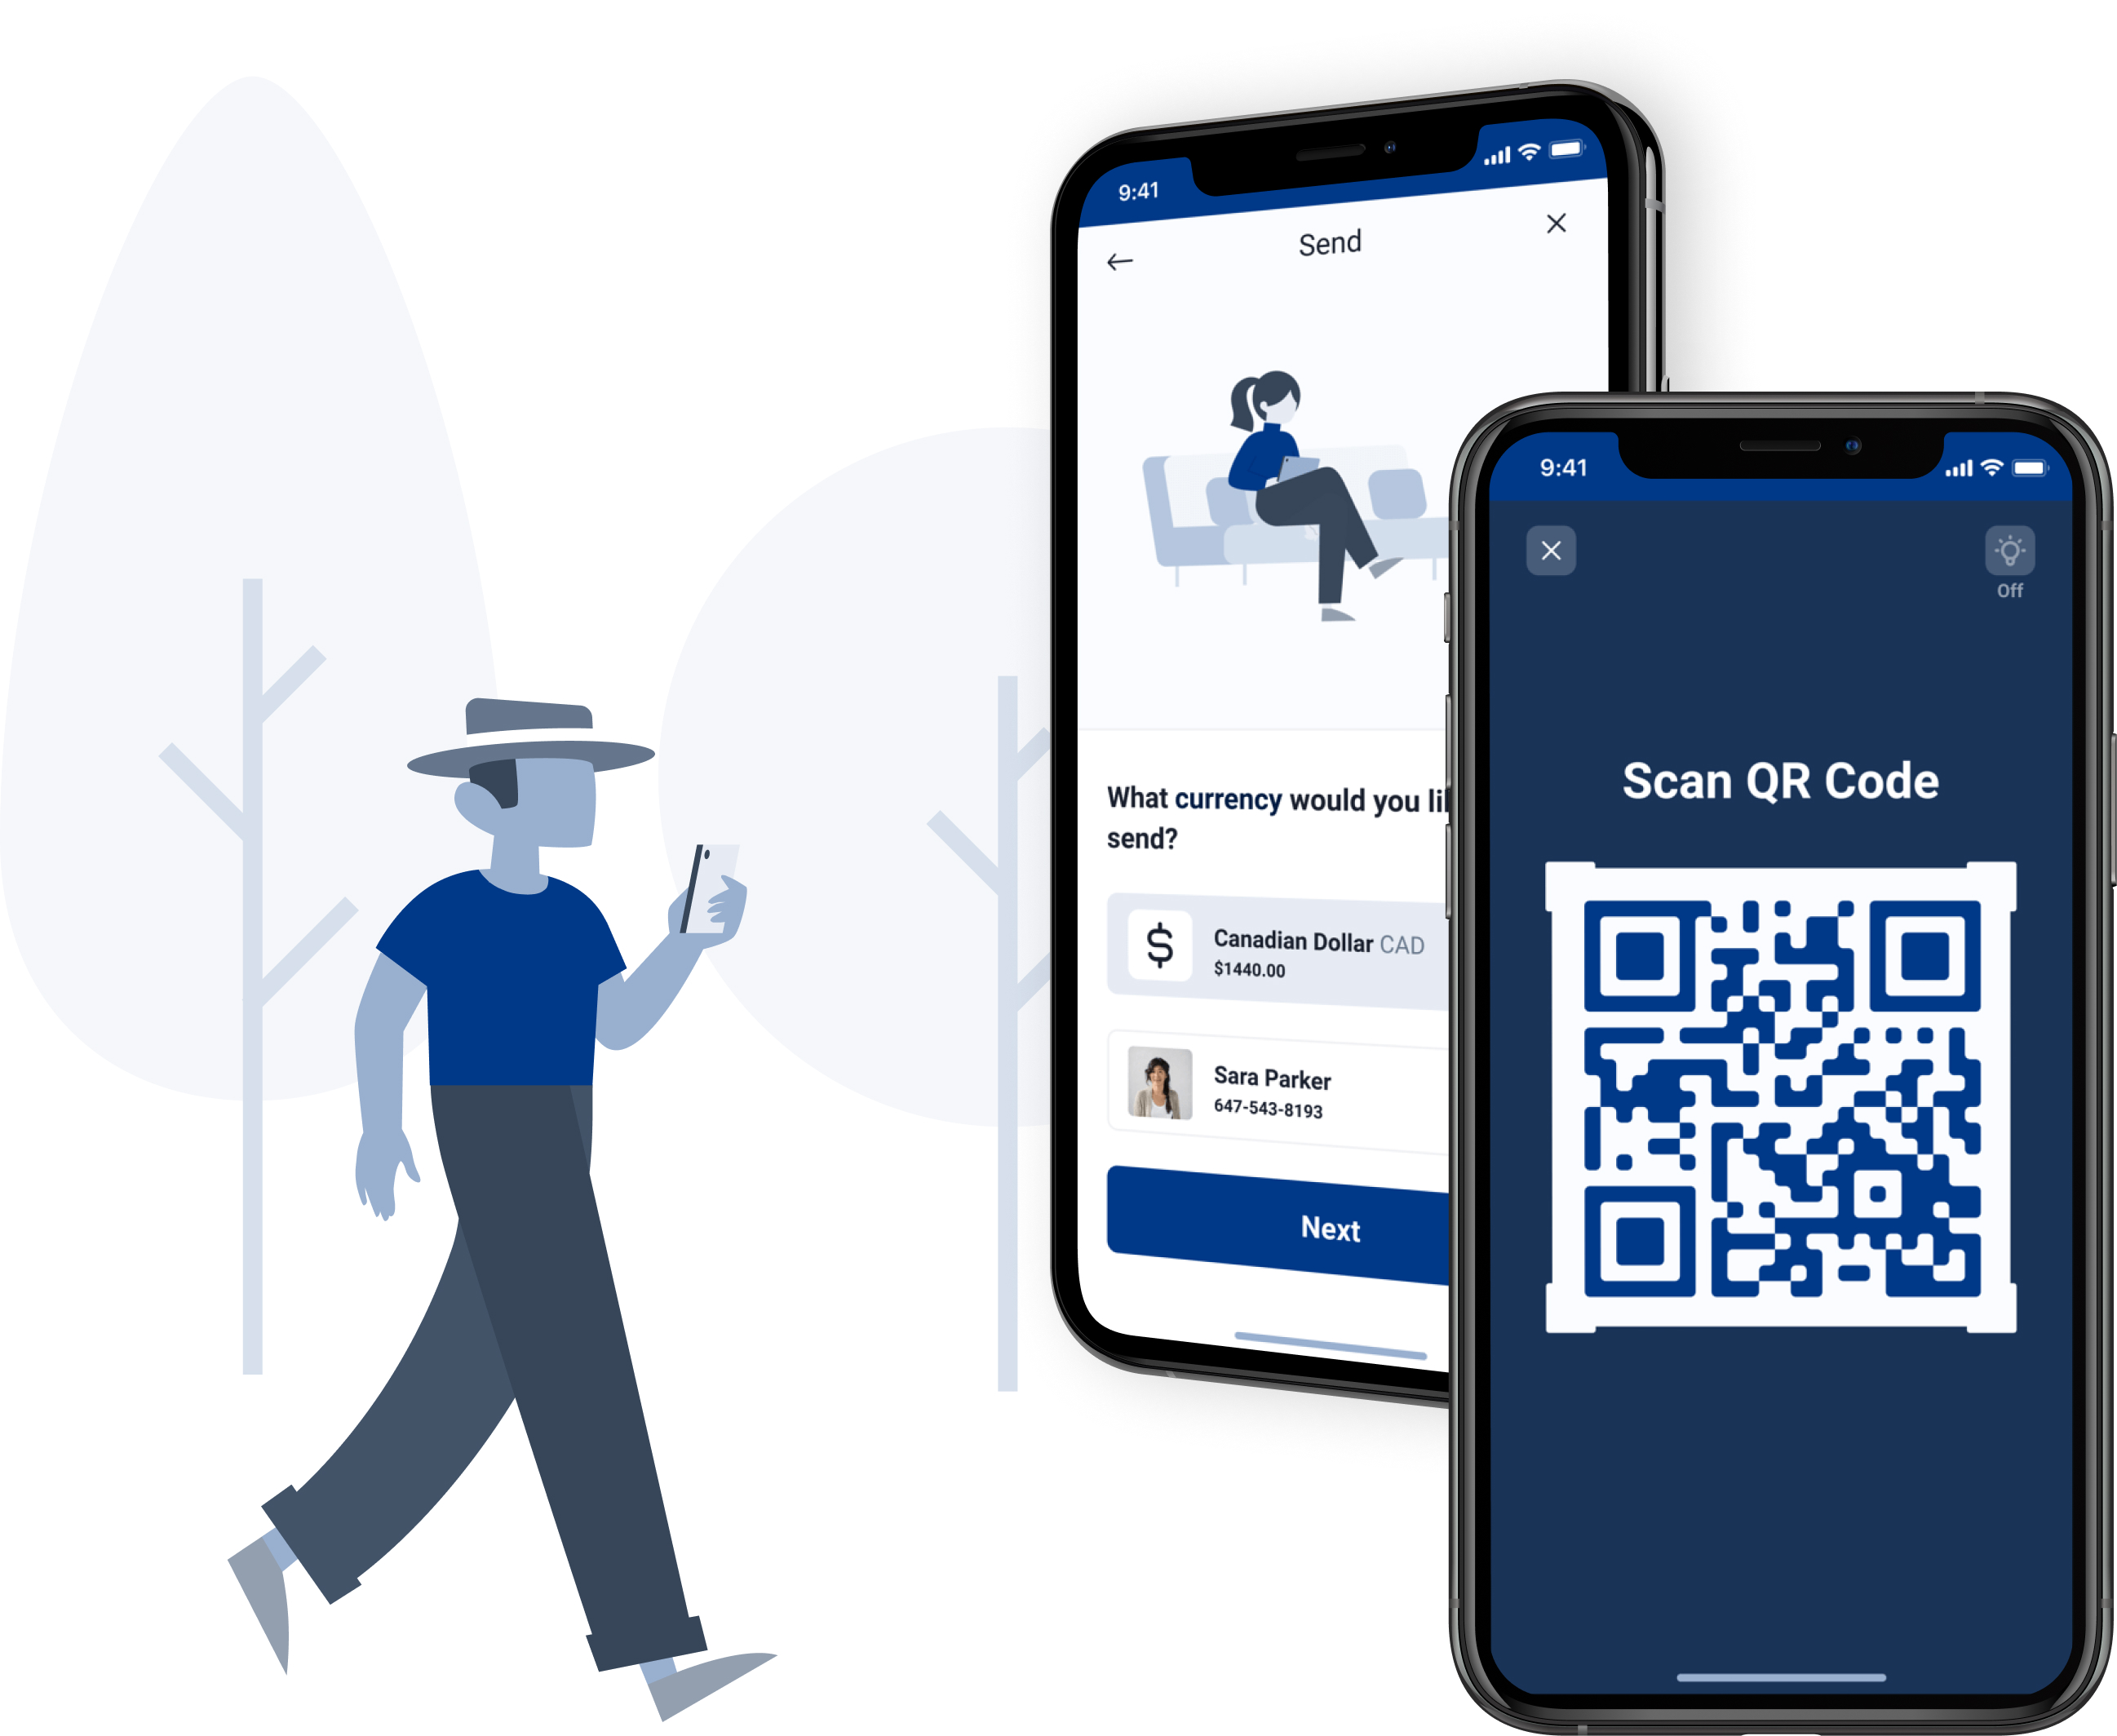 Man walking with cellphone, and two mockups, one with a screenshot of the "Send" screen, and the other of a QR code.